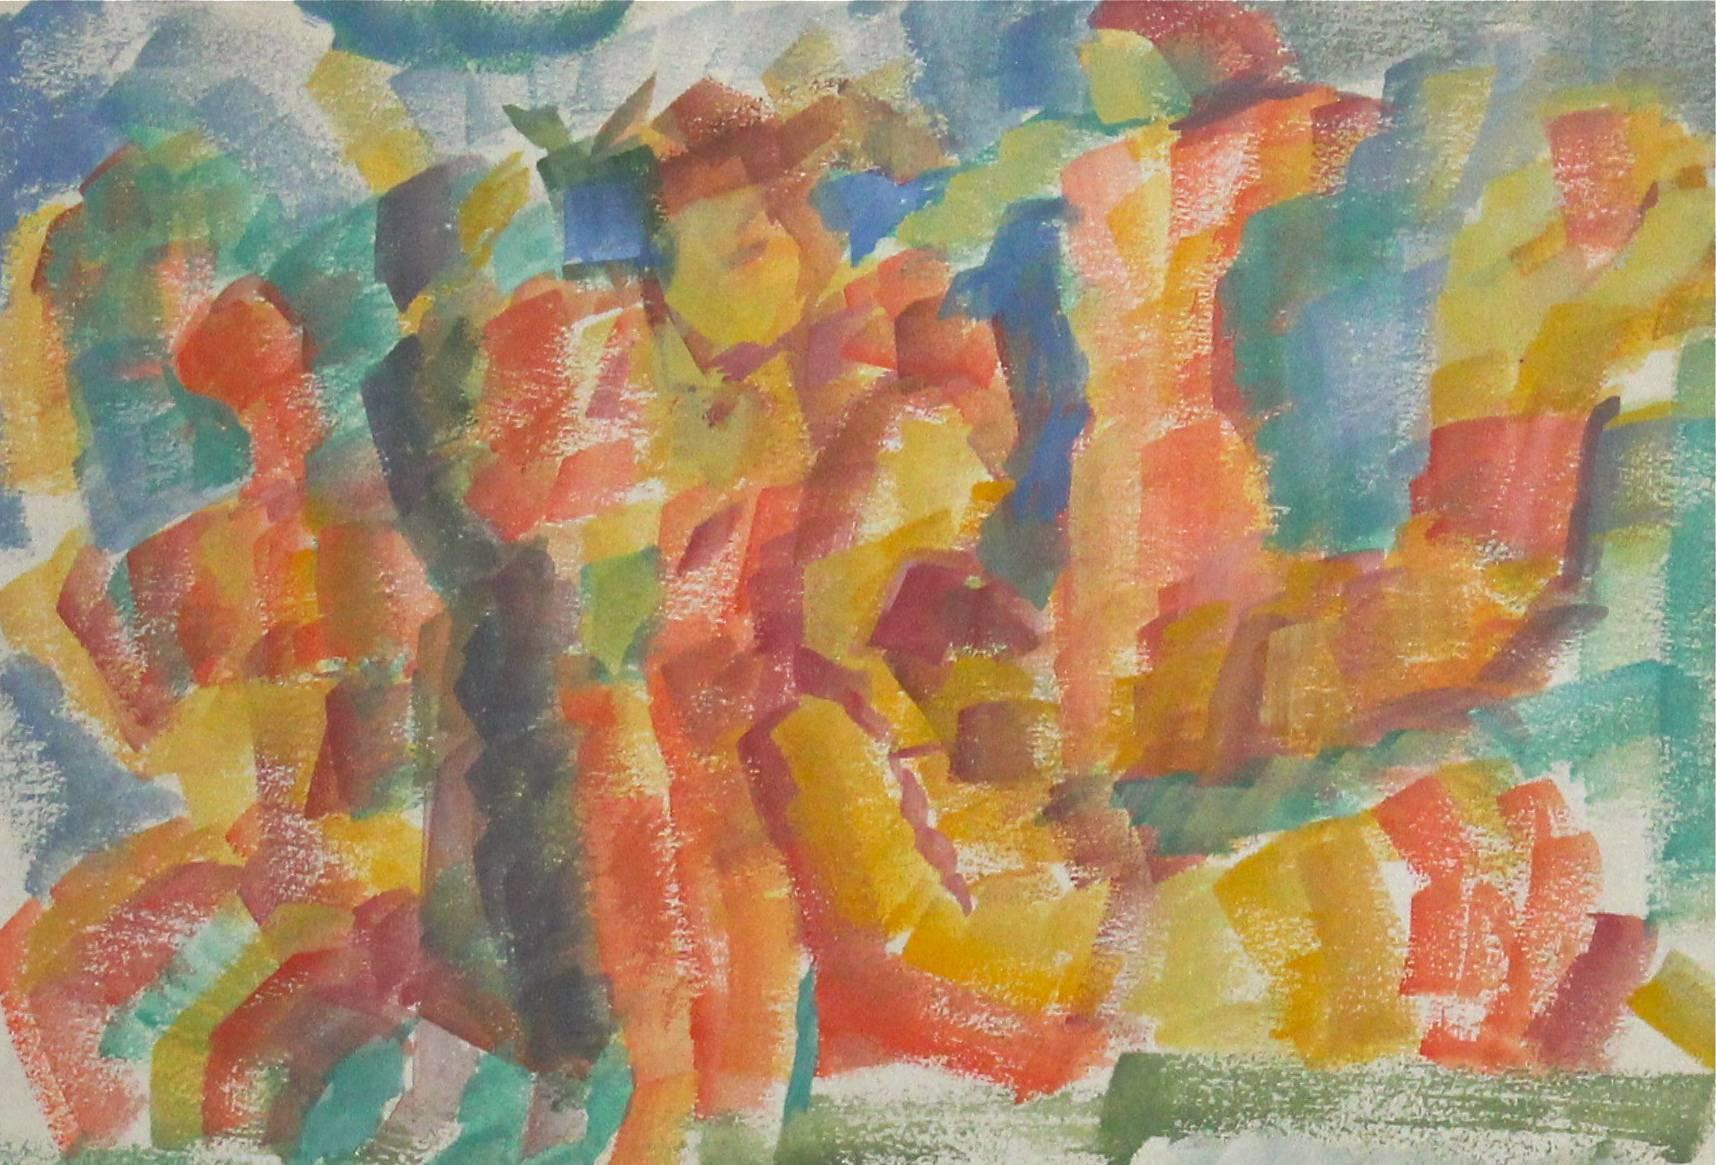 Expressionist Figures in Watercolor, Framed, Early 20th Century - Art by Jennings Tofel